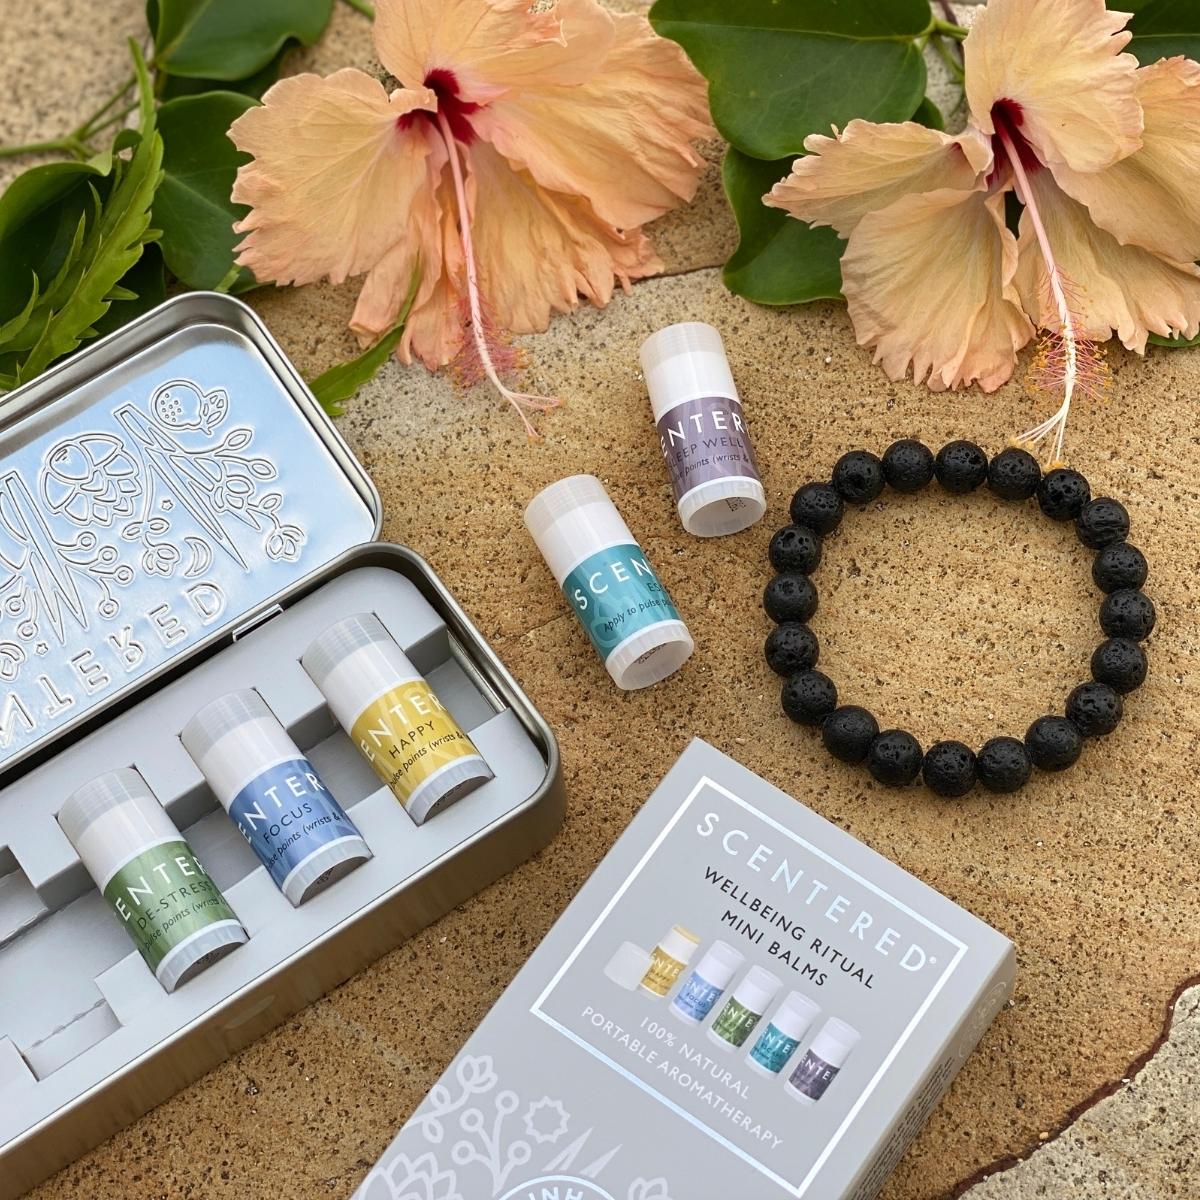 Aromatherapy Grounding Bracelet with Essential Oil